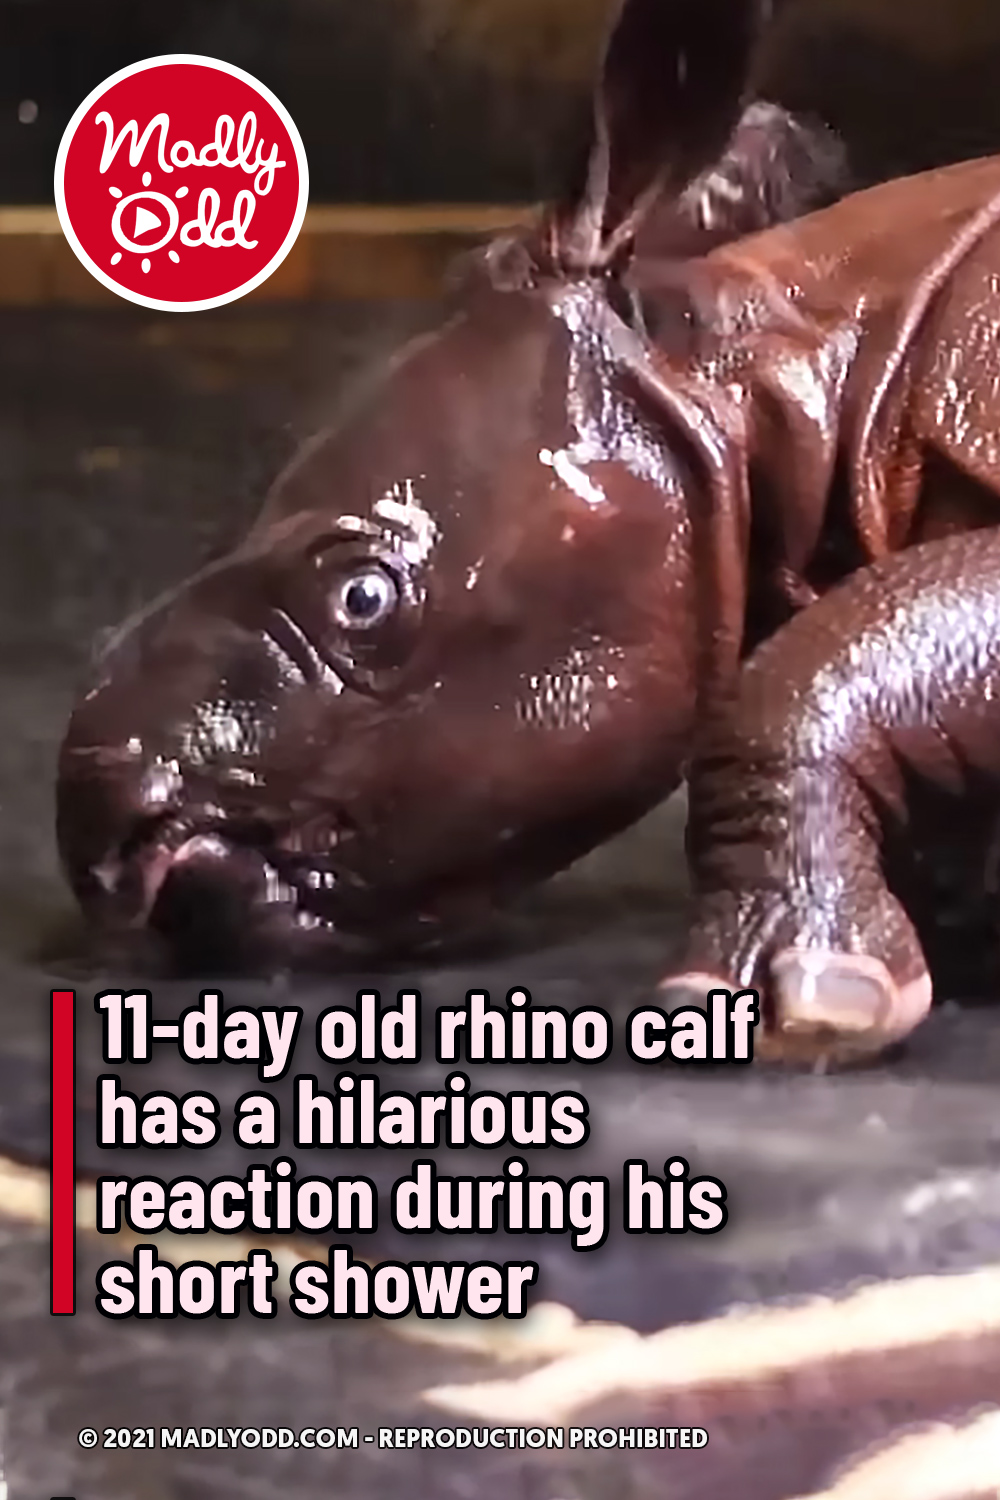 11-day old rhino calf has a hilarious reaction during his short shower